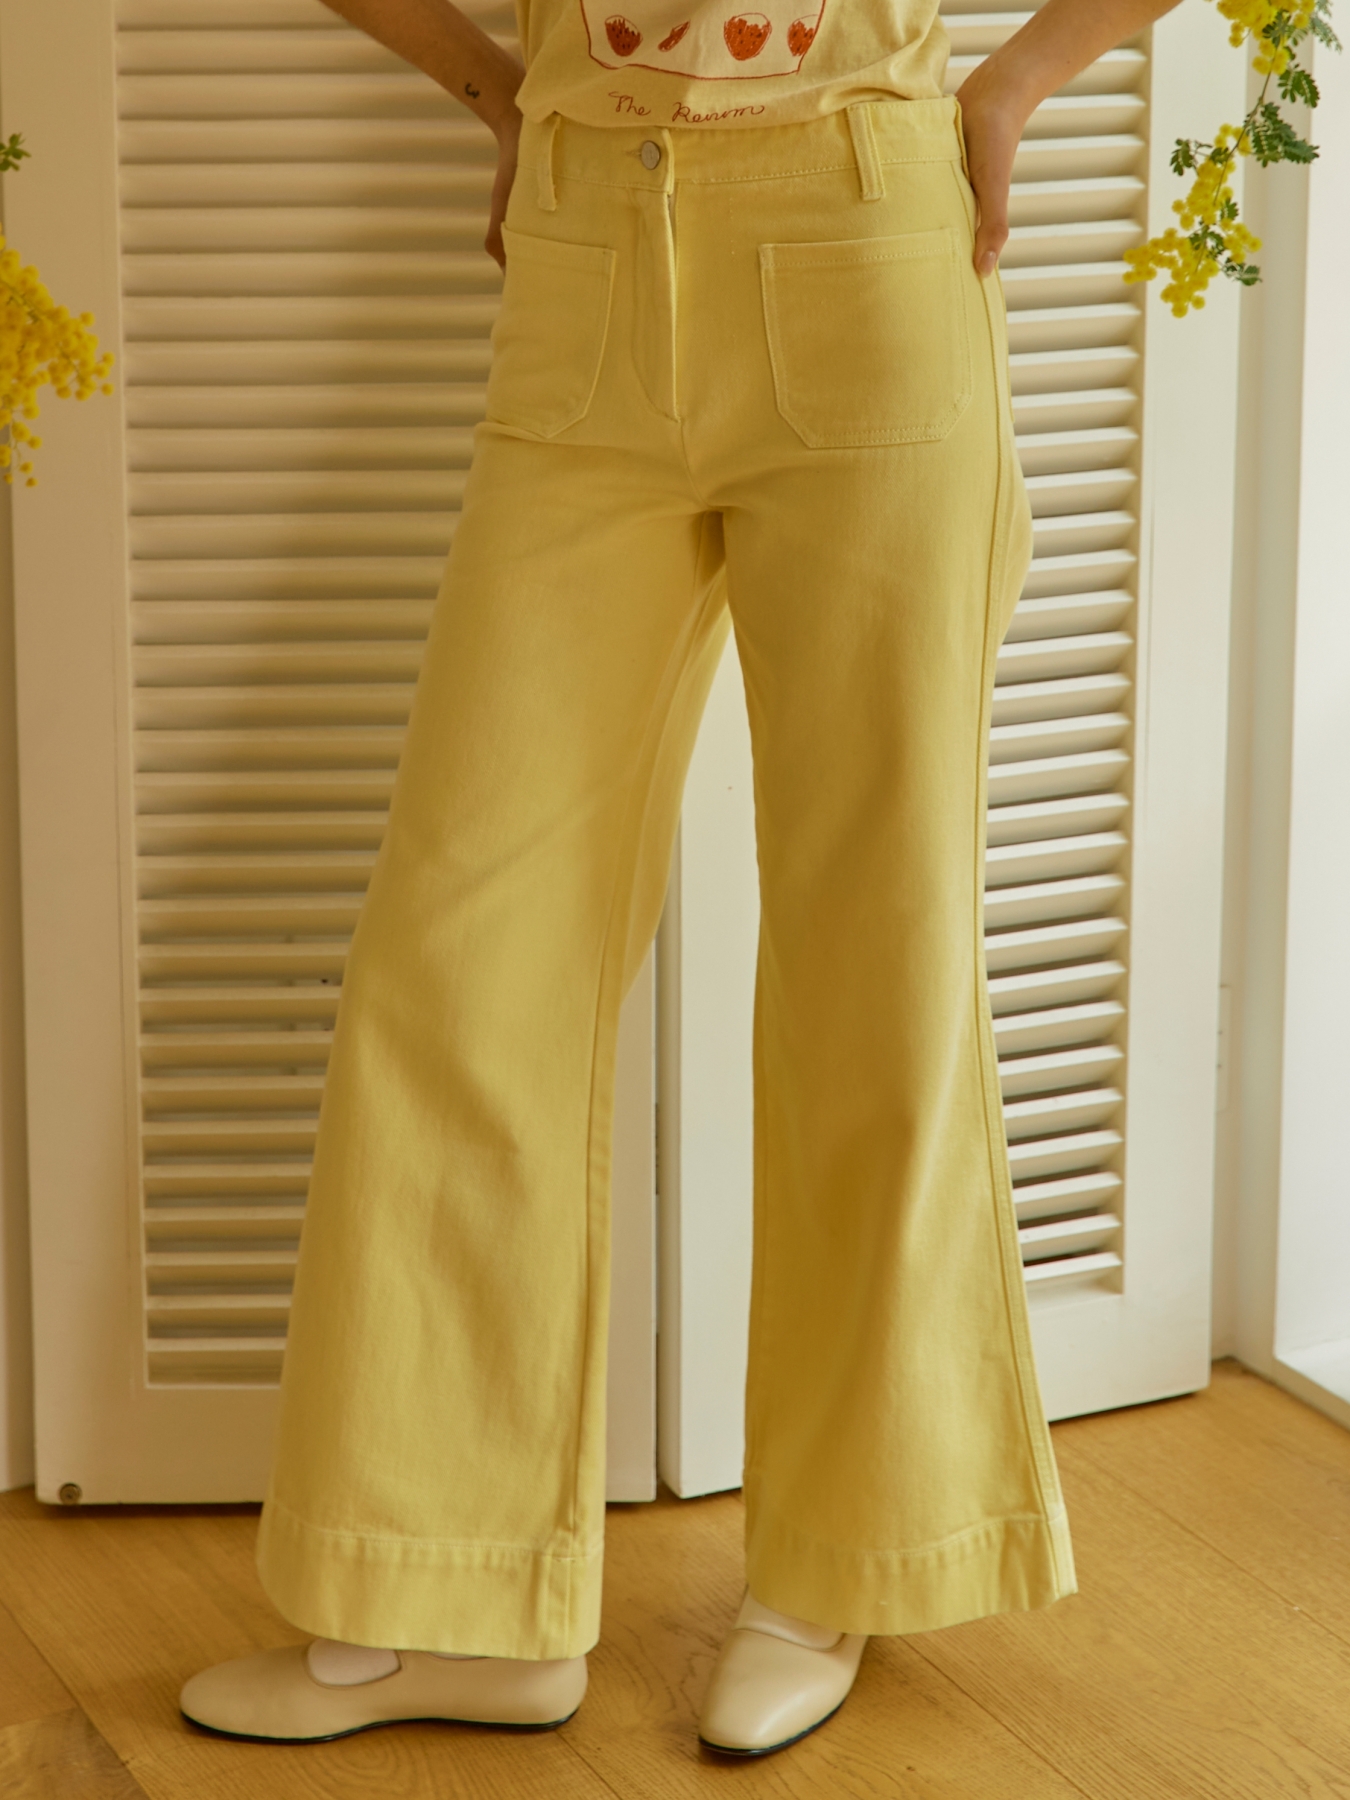 2ND / EMIL HIGH RISE JEANS in YELLOW